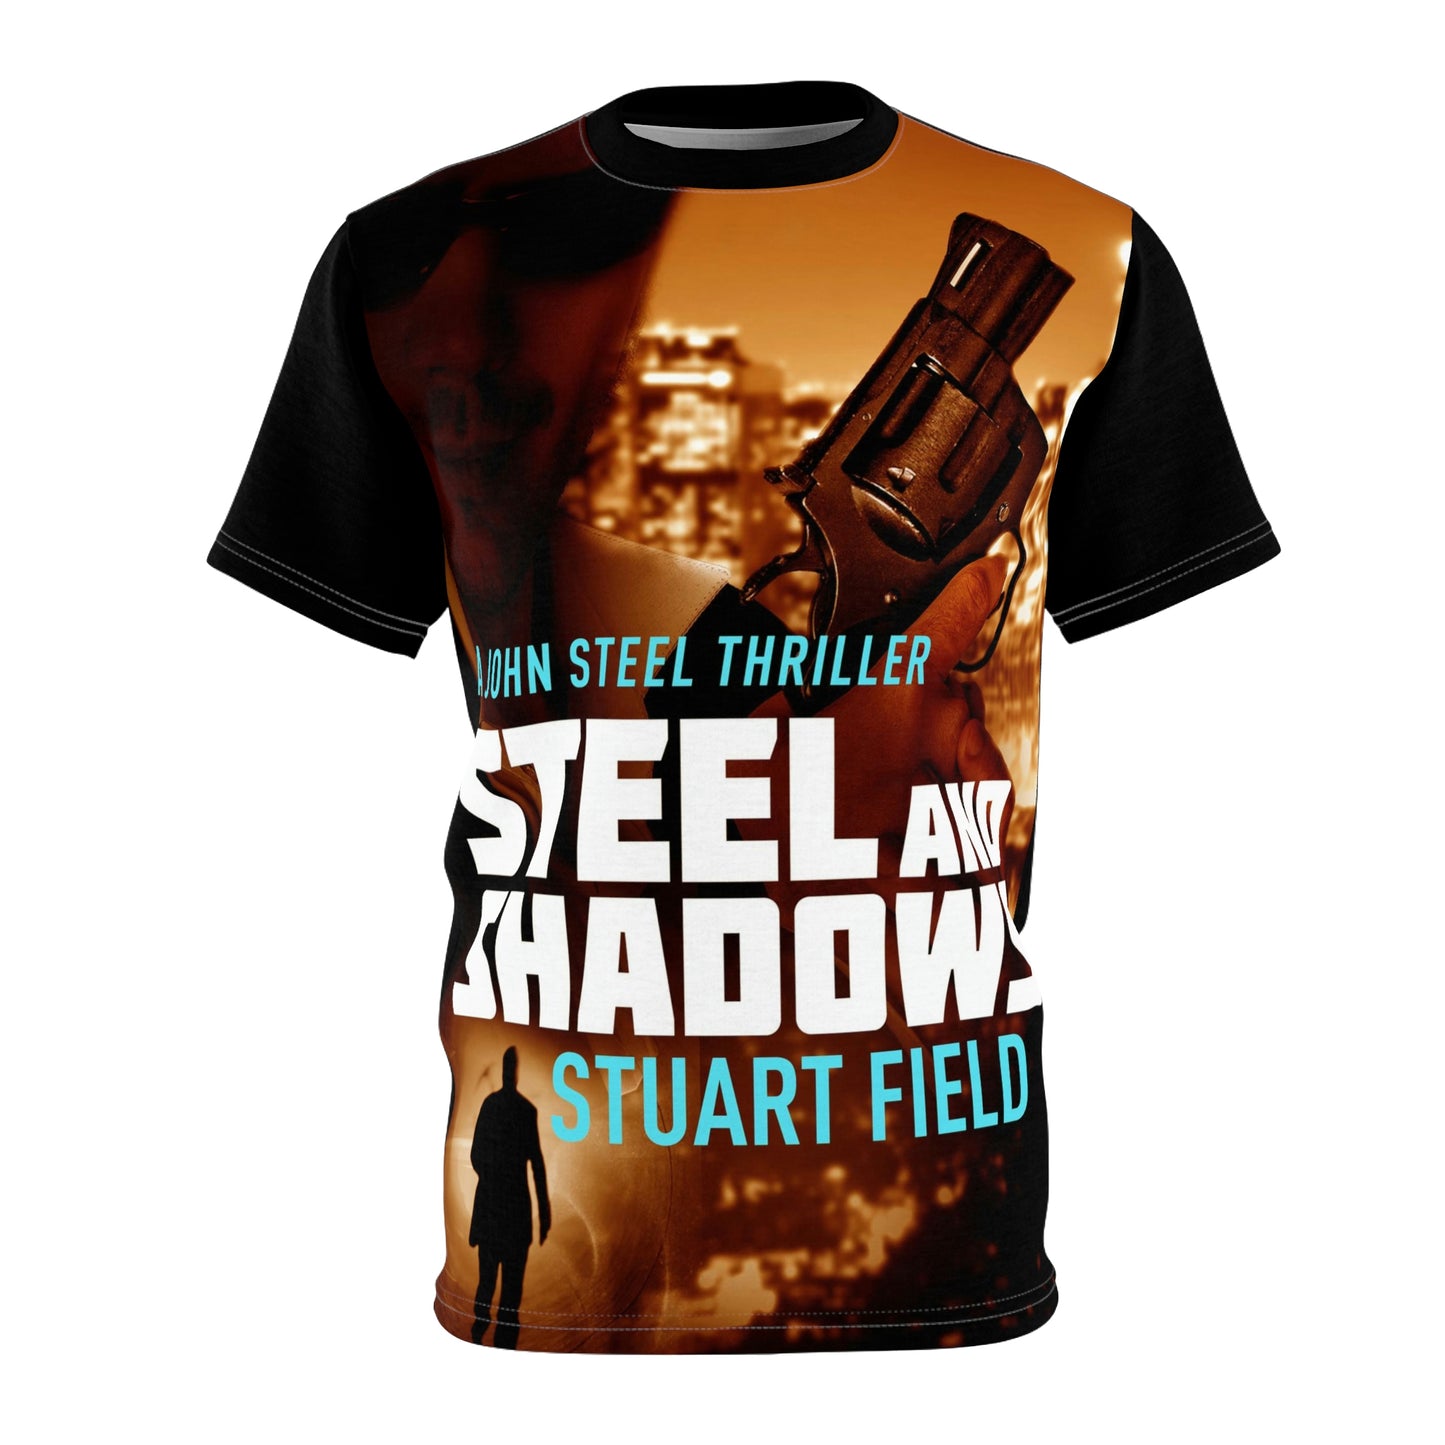 Steel And Shadows - Unisex All-Over Print Cut & Sew T-Shirt